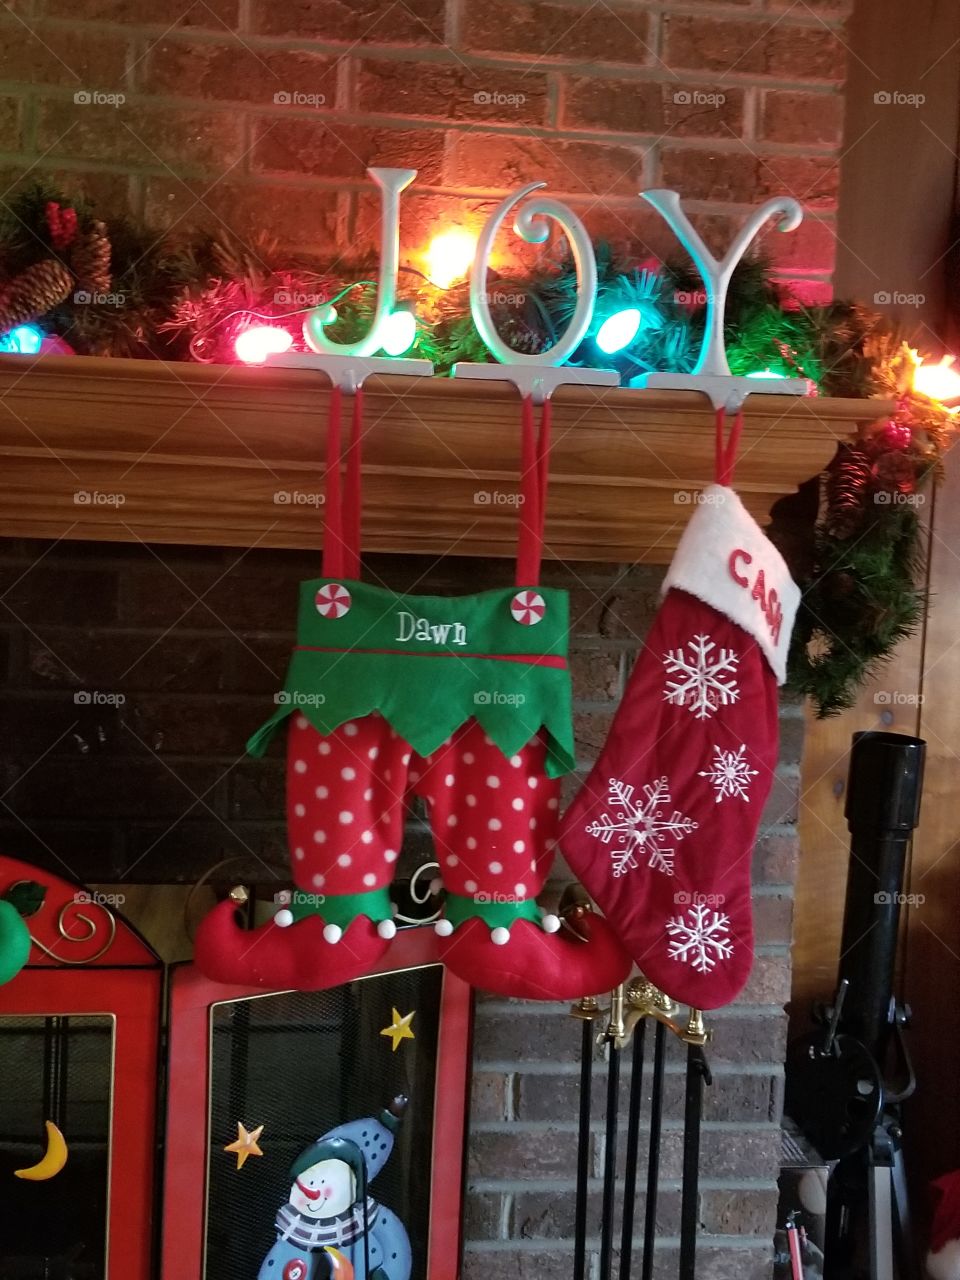 Stockings hung by the fire